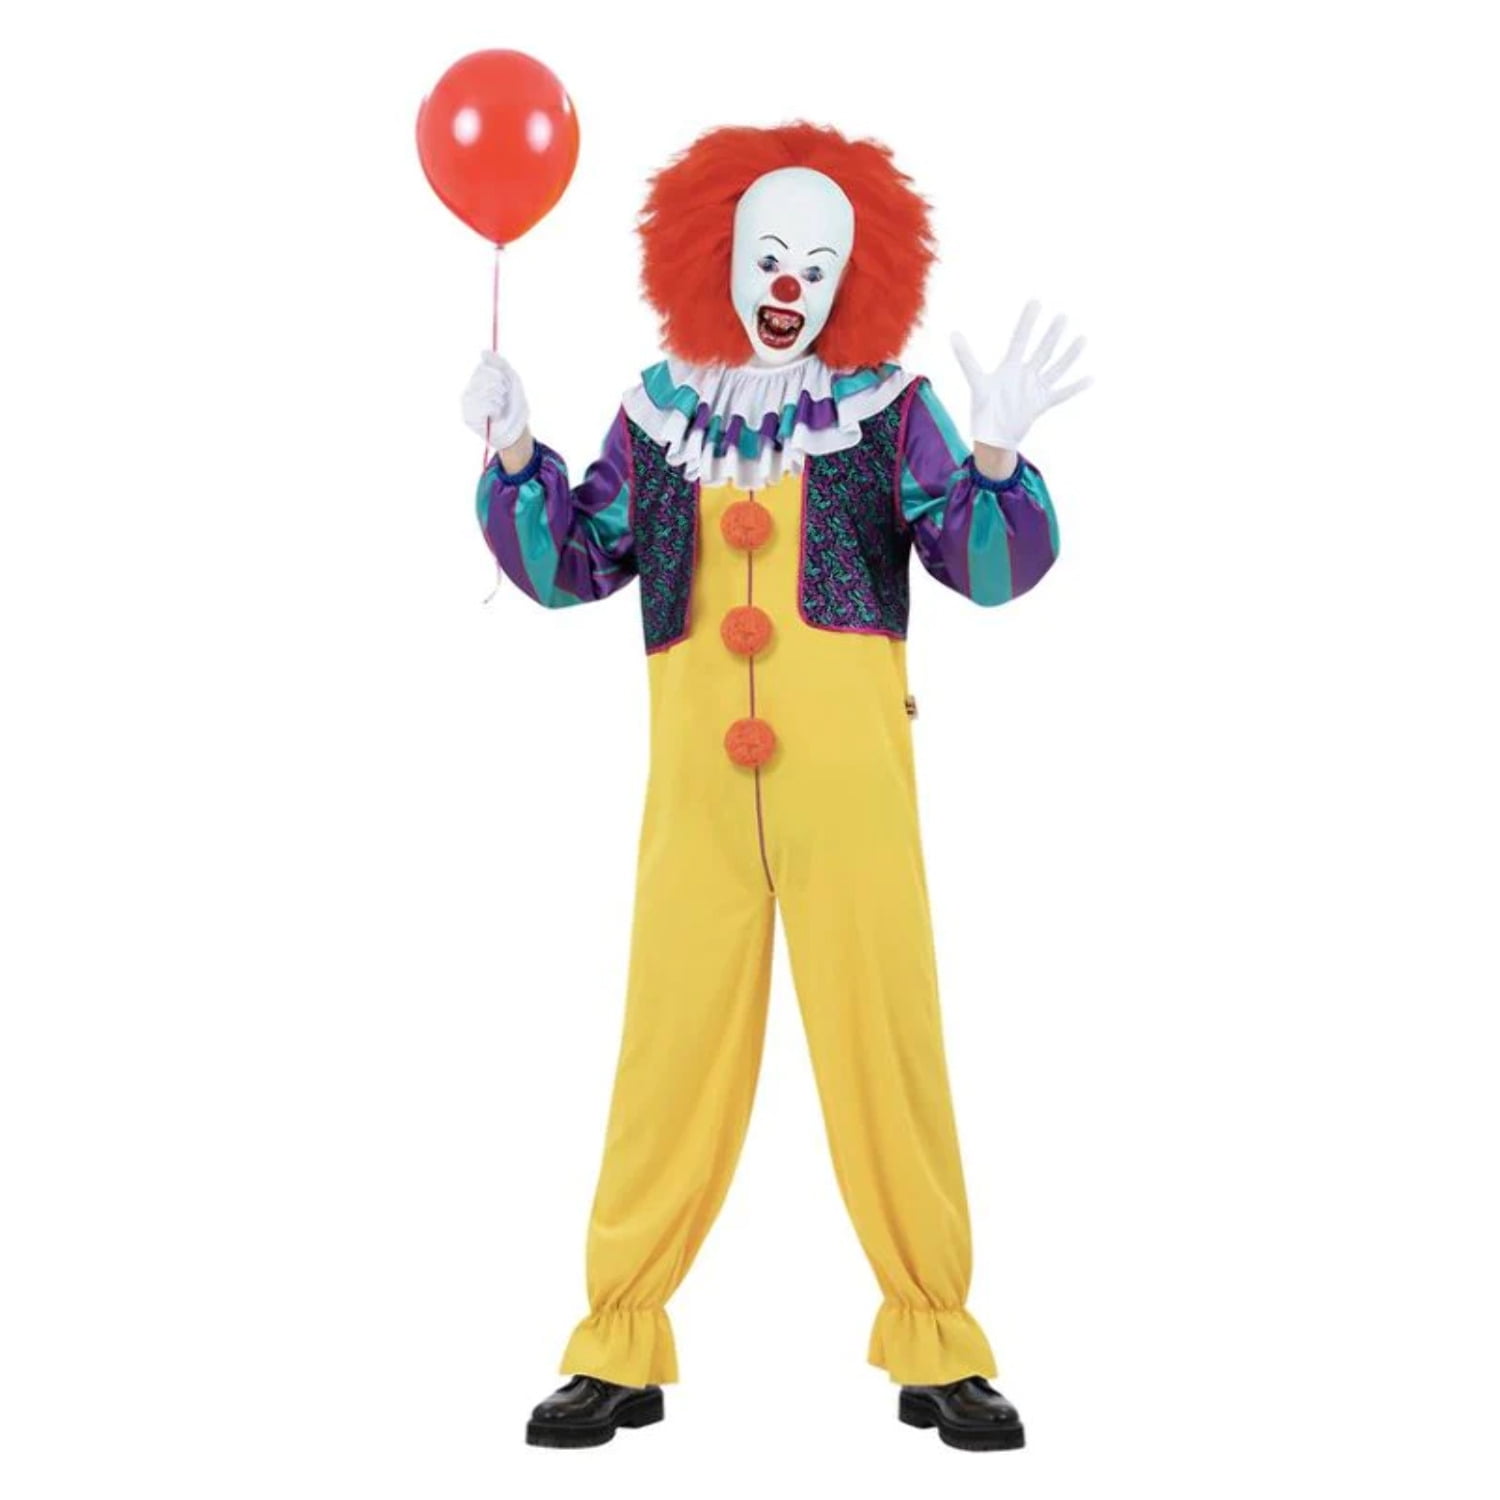 IT The Movie Pennywise Costume Adult - Walmart.com